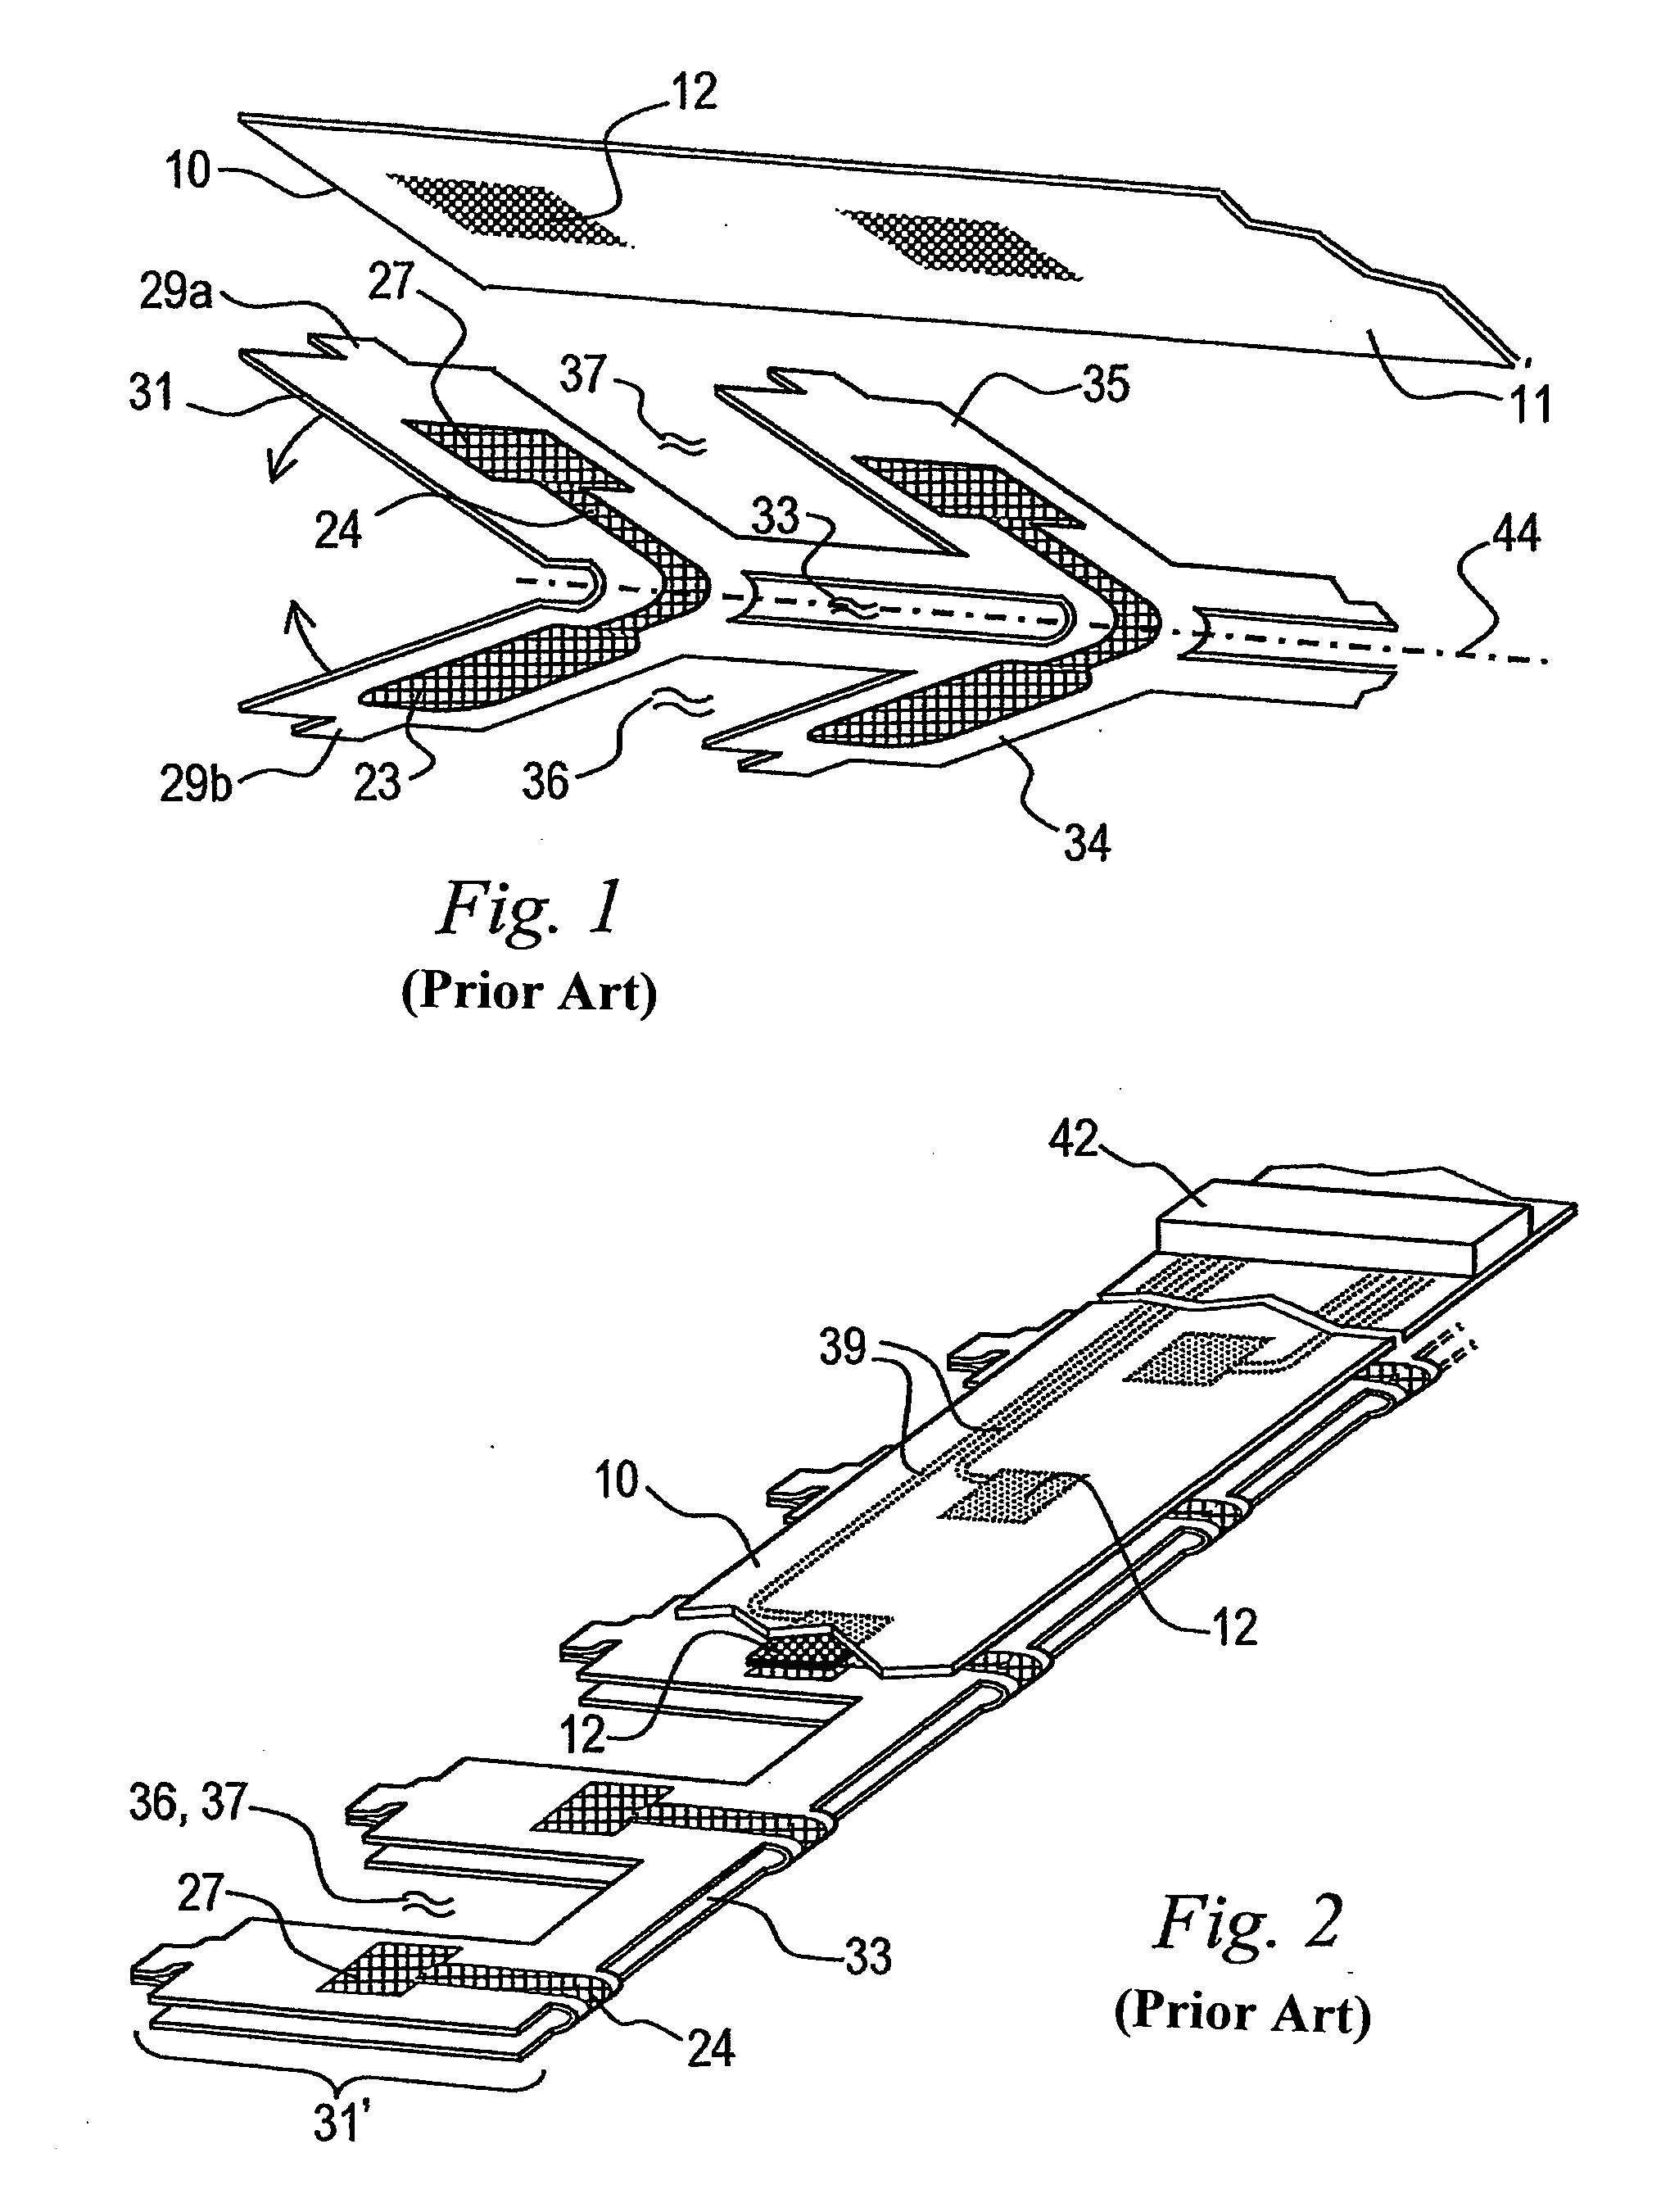 Electrode system for transdermal conduction of electric signals, and a method of use thereof